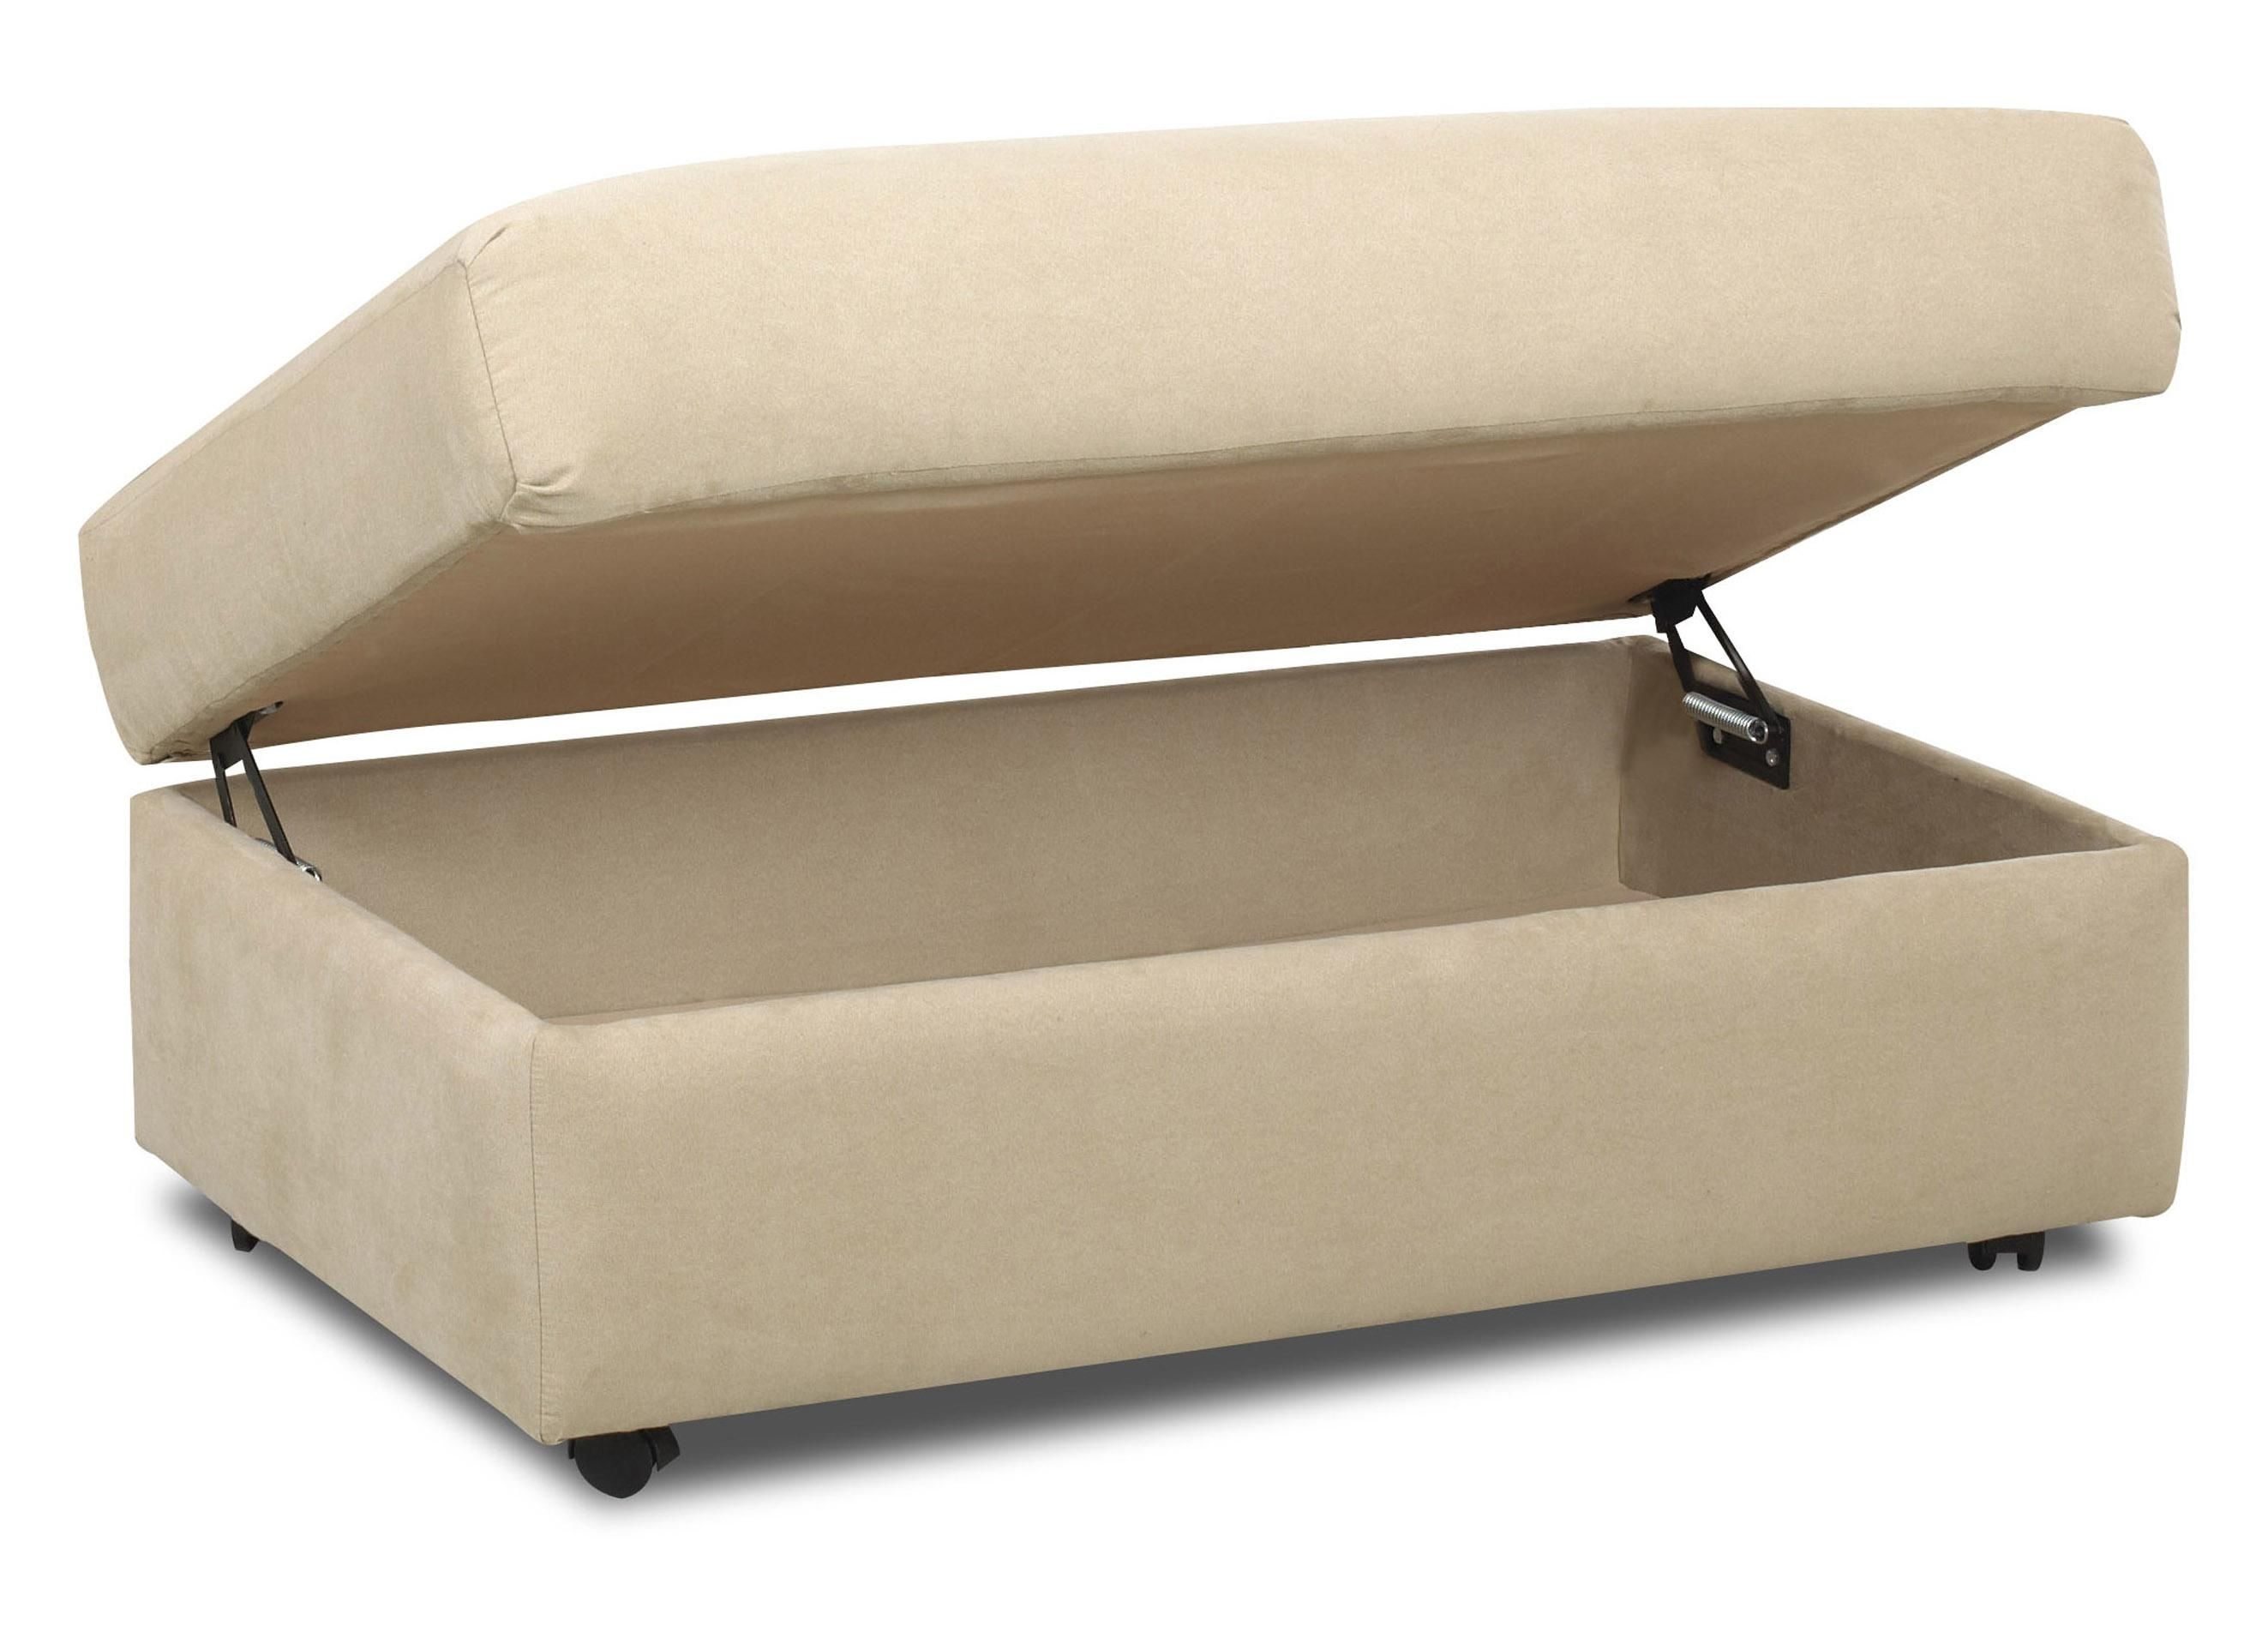 Home Design : Furniture. Rectangle Beige Storage Ottoman With Small Throughout Ottomans With Wheels (Photo 10 of 10)